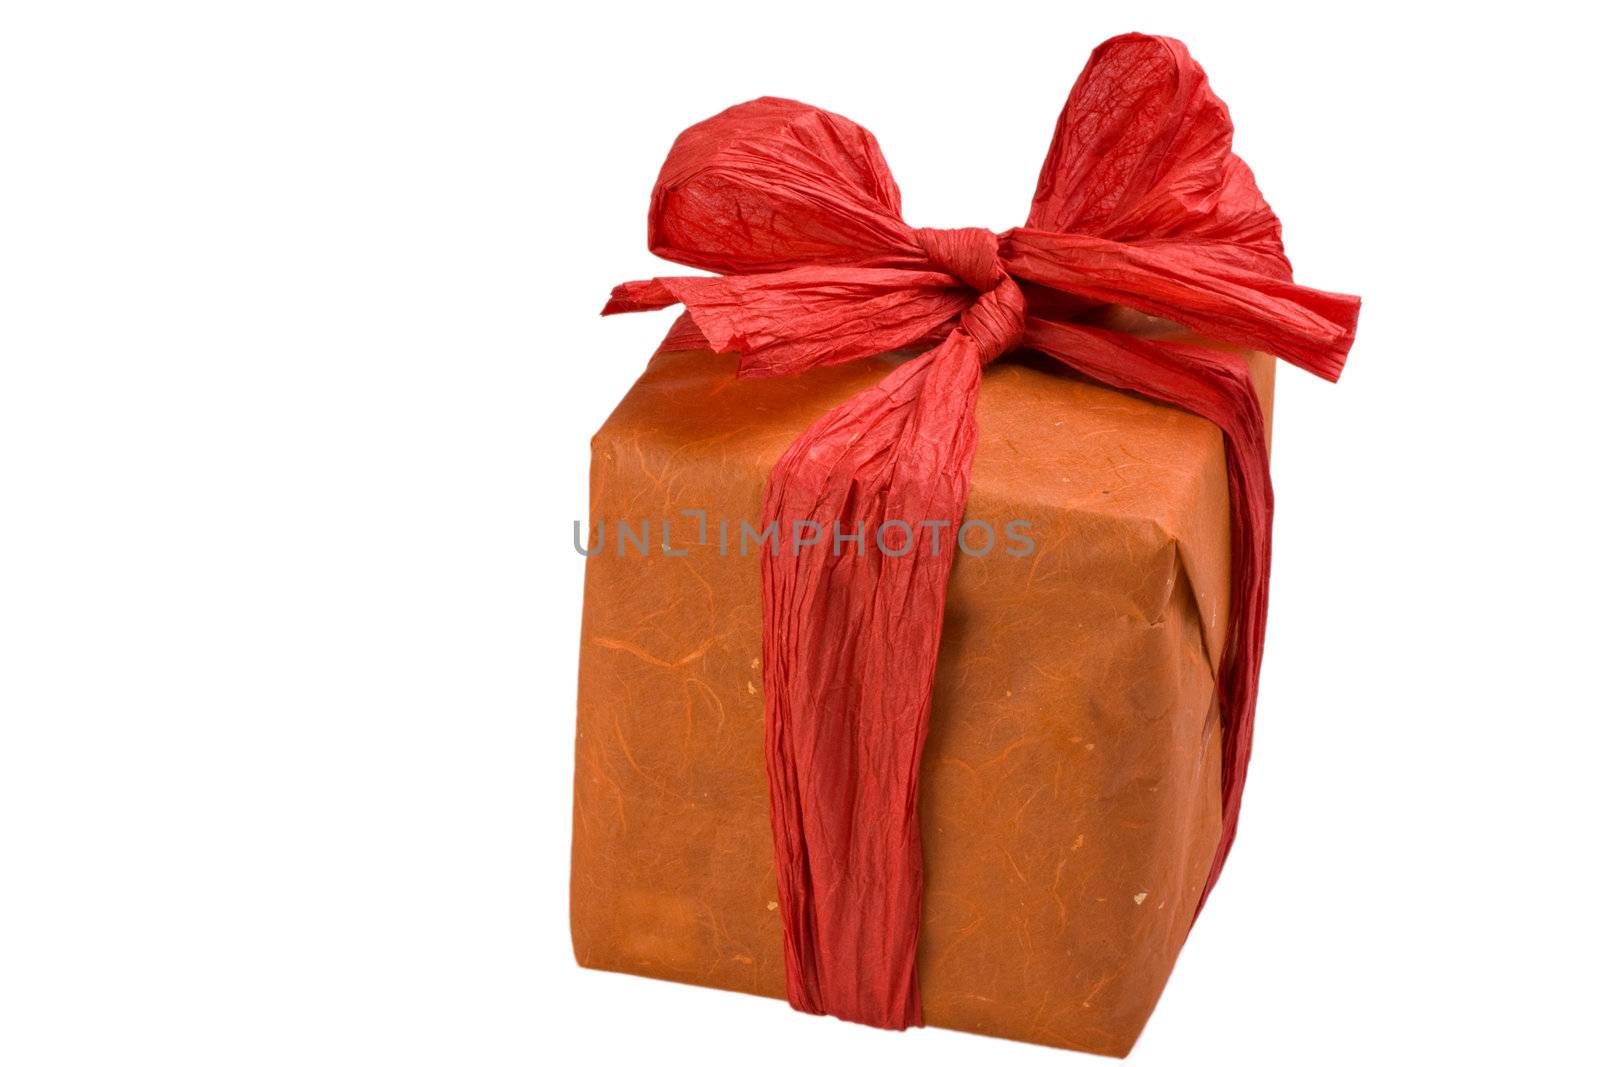 gift wrapped in orange paper with a red bow by bernjuer